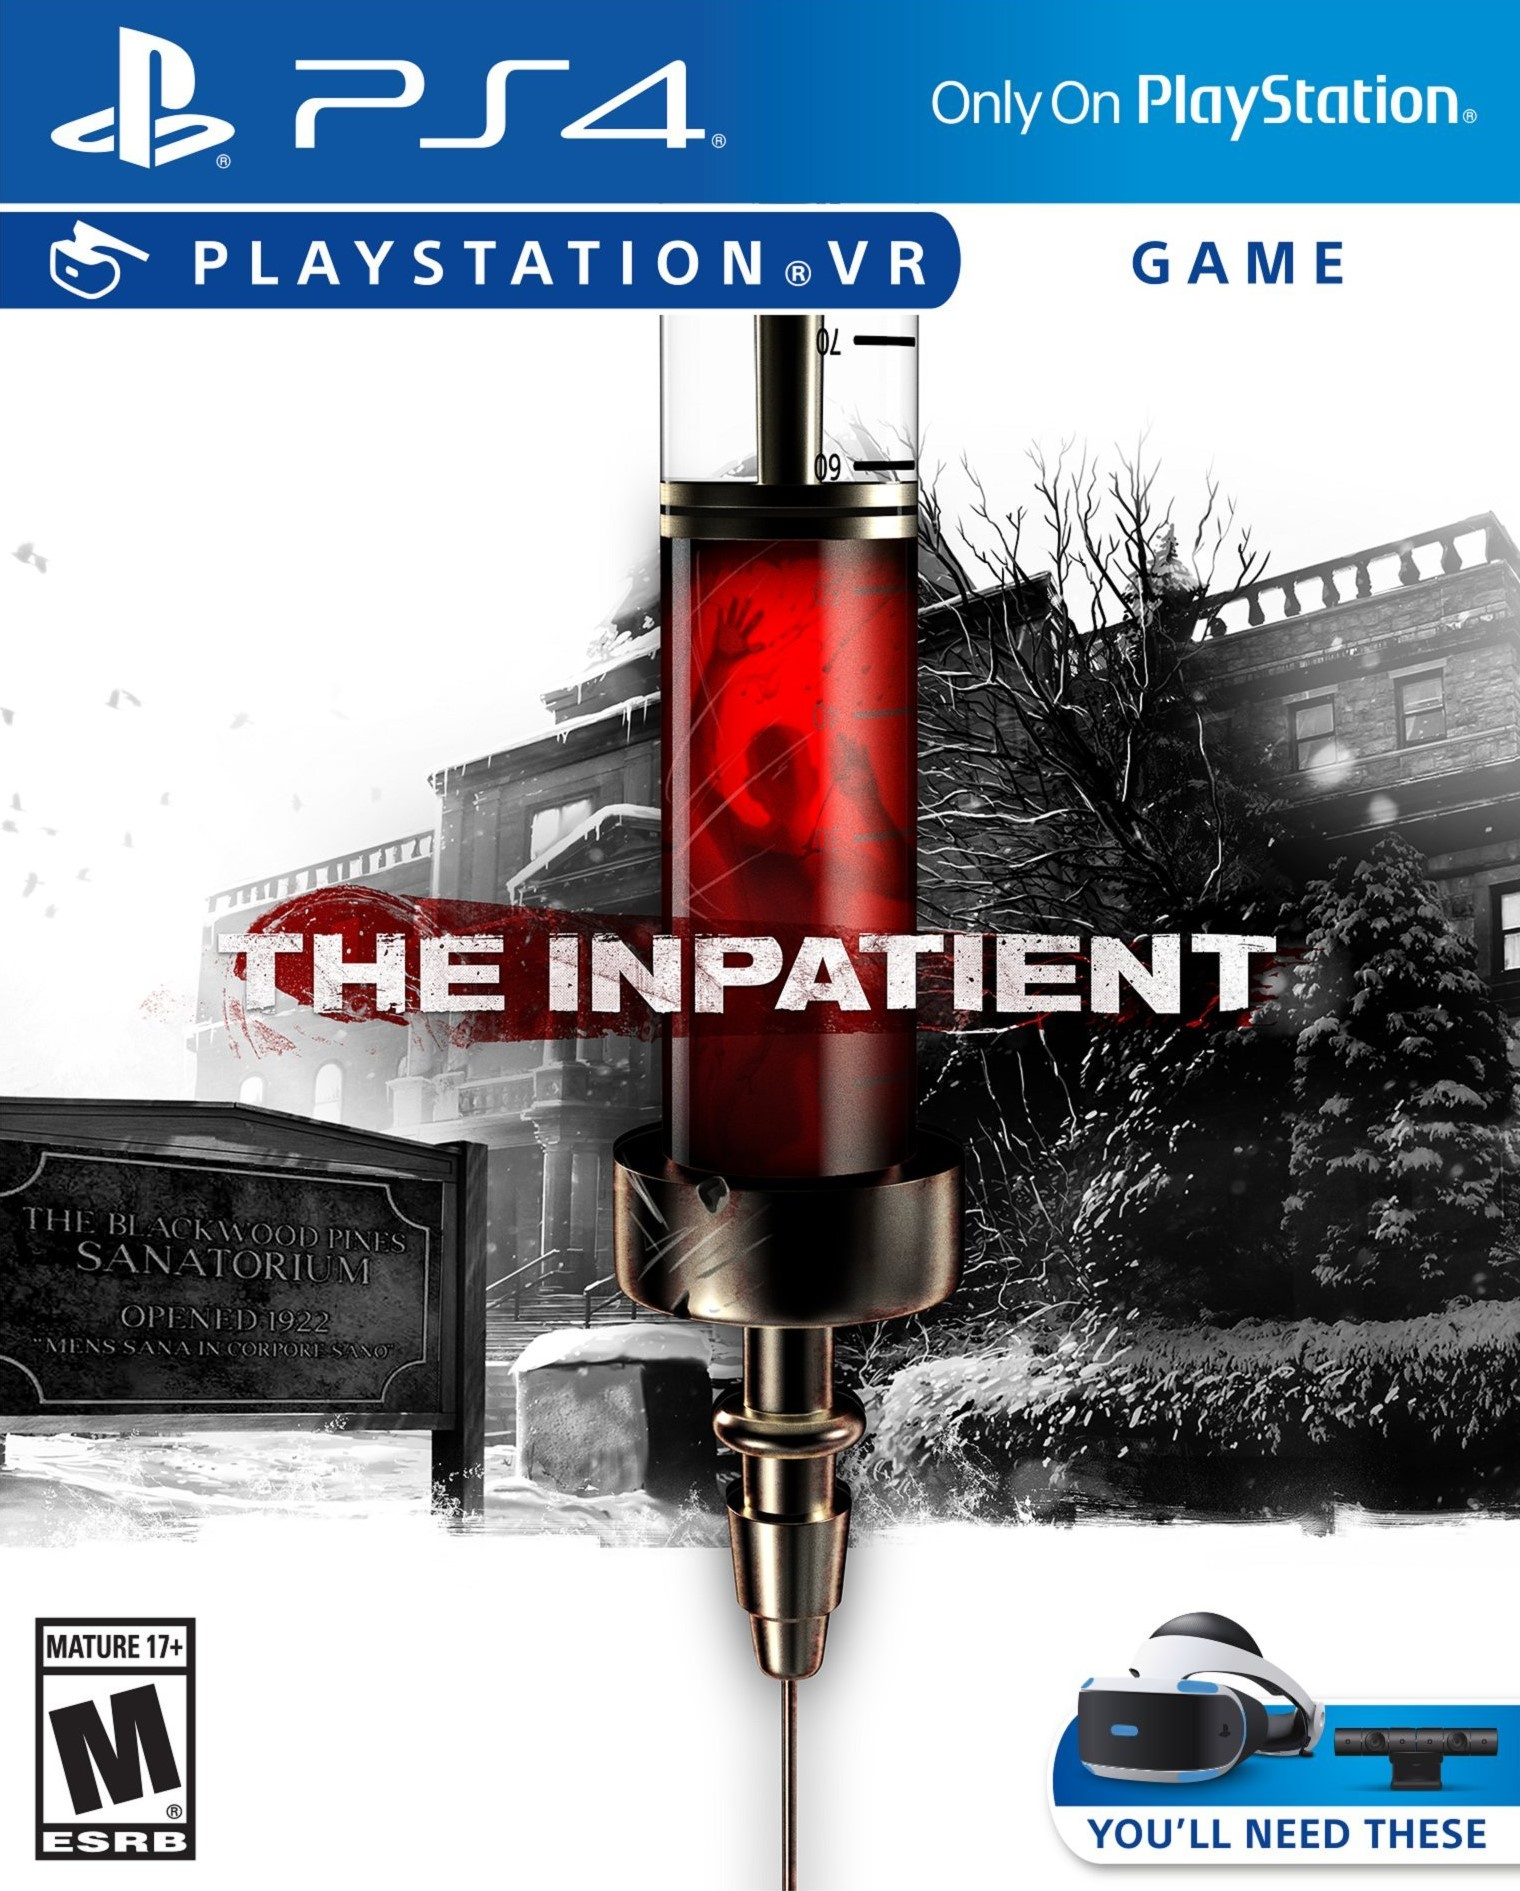 The Inpatient [PS4 Exclusive VR Only] 5.05 / 6.72 / 7.02 [EUR] (2018) [Русский] (v1.02)